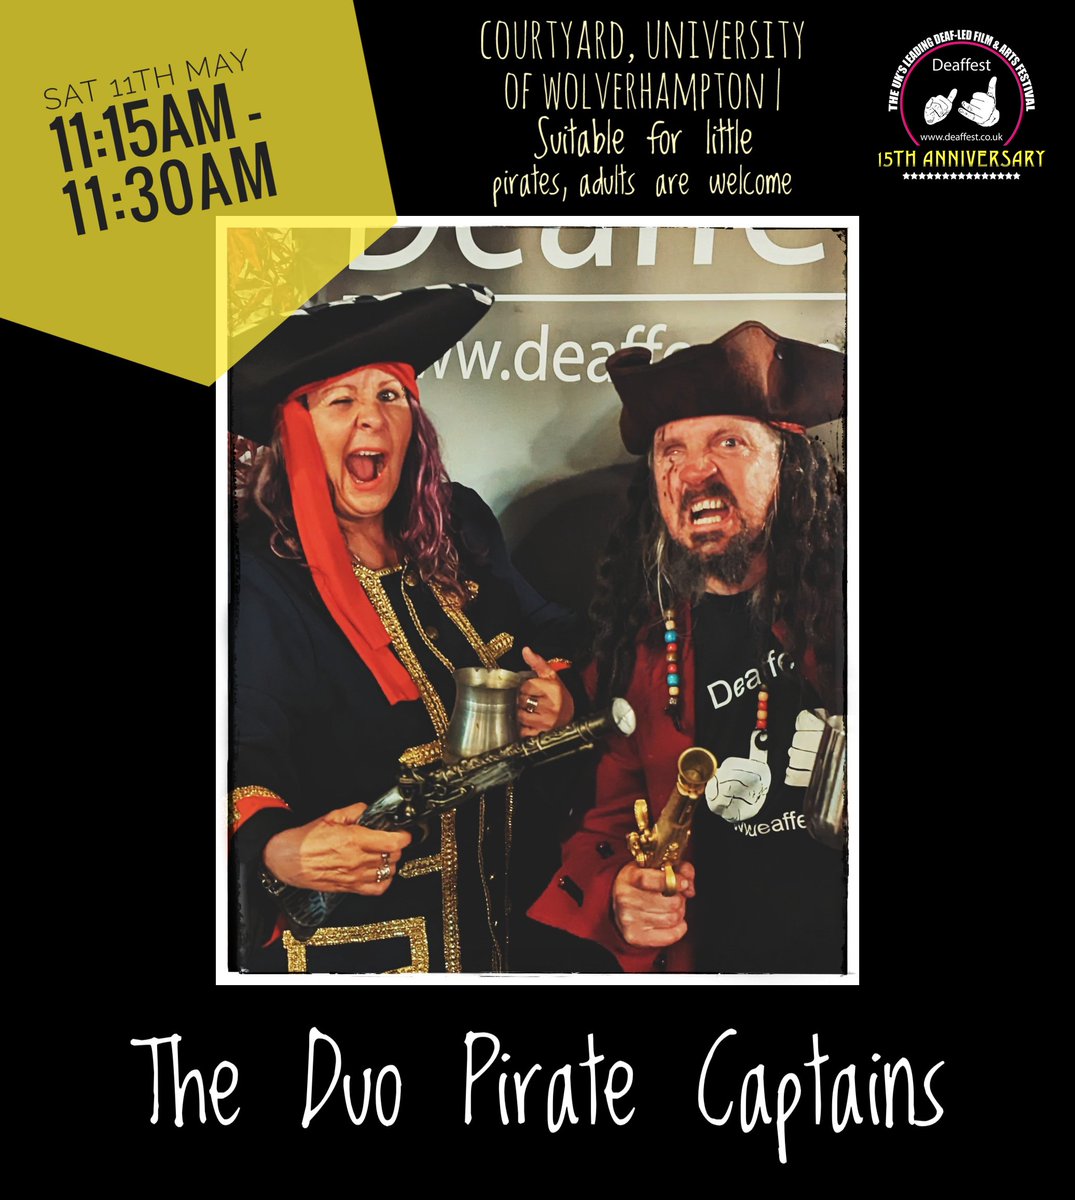 Yo ho ho! Come and join Captain Smithy and C’ptn Maz in this interactive BSL story-telling event at #Deaffest 2024! The Captains will share pirate tales of the Seven Seas, plus enjoy some sea shanties… SAVVY! #TuneintoDeaffests15th